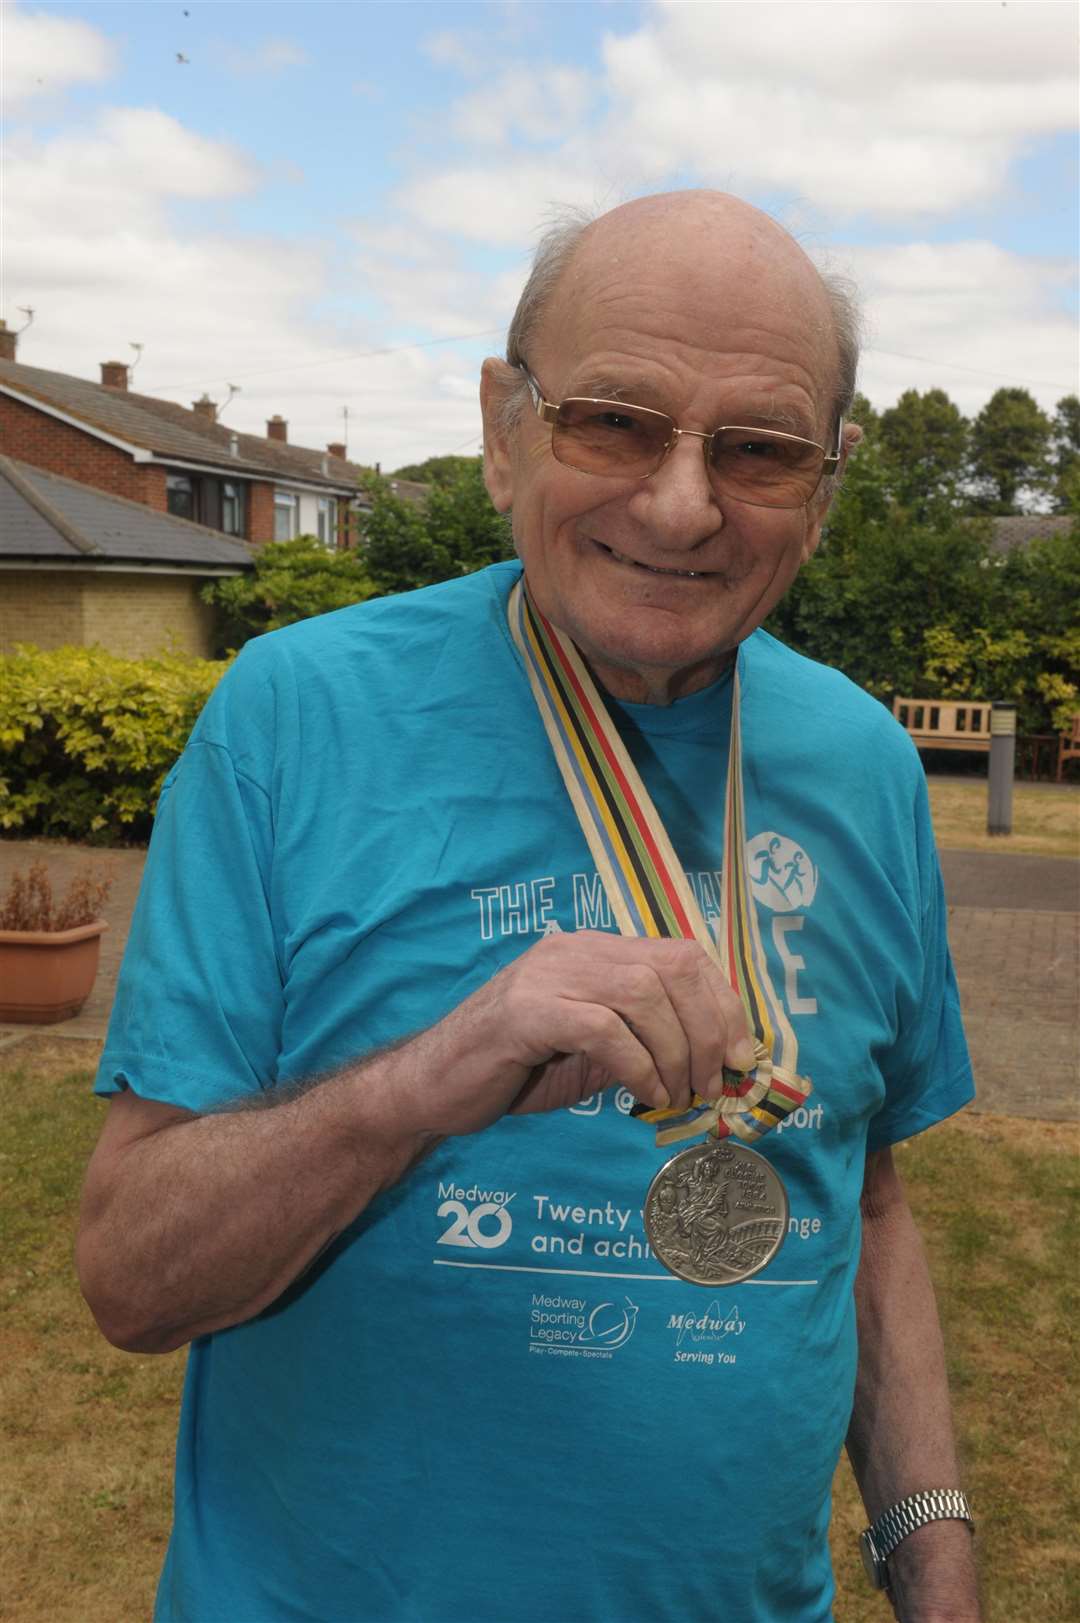 Unfortunately Paul's health has been deteriorating over the years - but it didn't stop him winning another medal. Picture: Steve Crispe